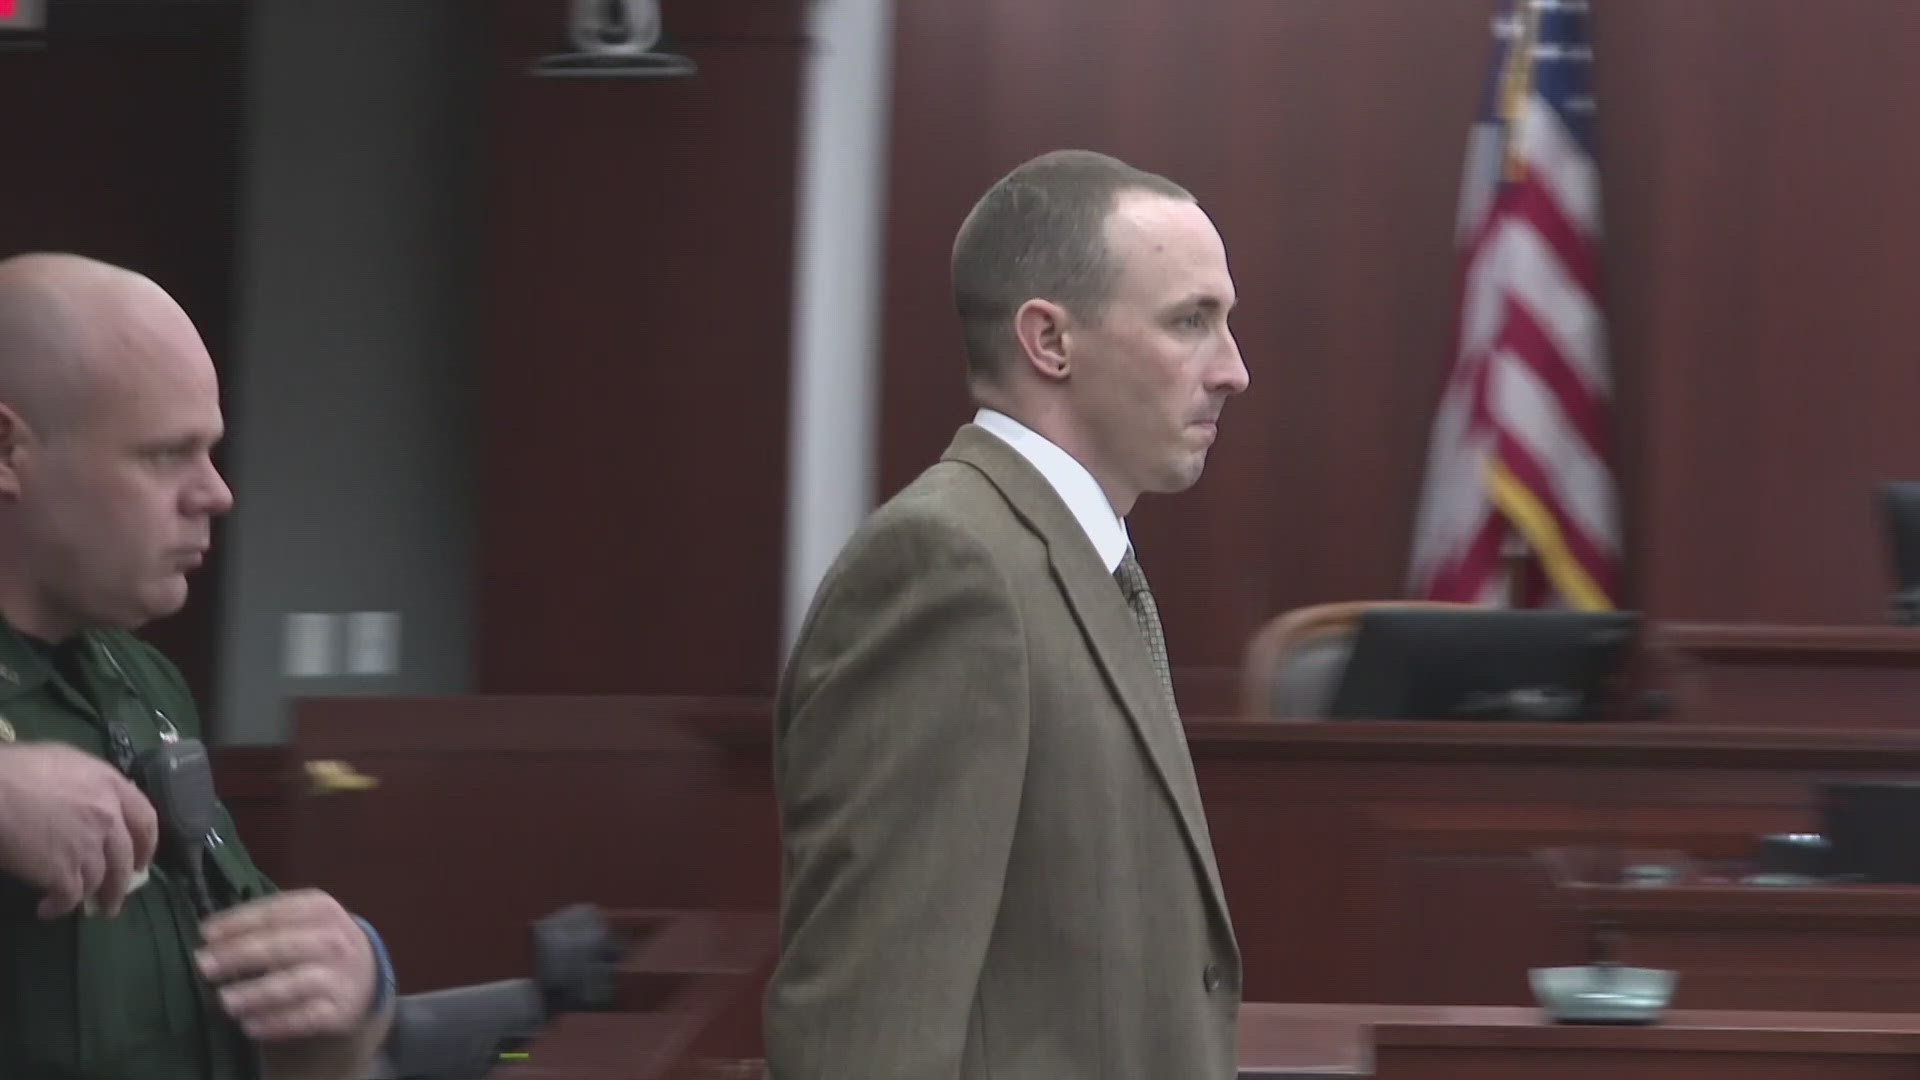 The penalty phase for Patrick McDowell entered its second week on Monday. He killed Nassau Deputy Joshua Moyers in 2021 & a jury will decide his fate.